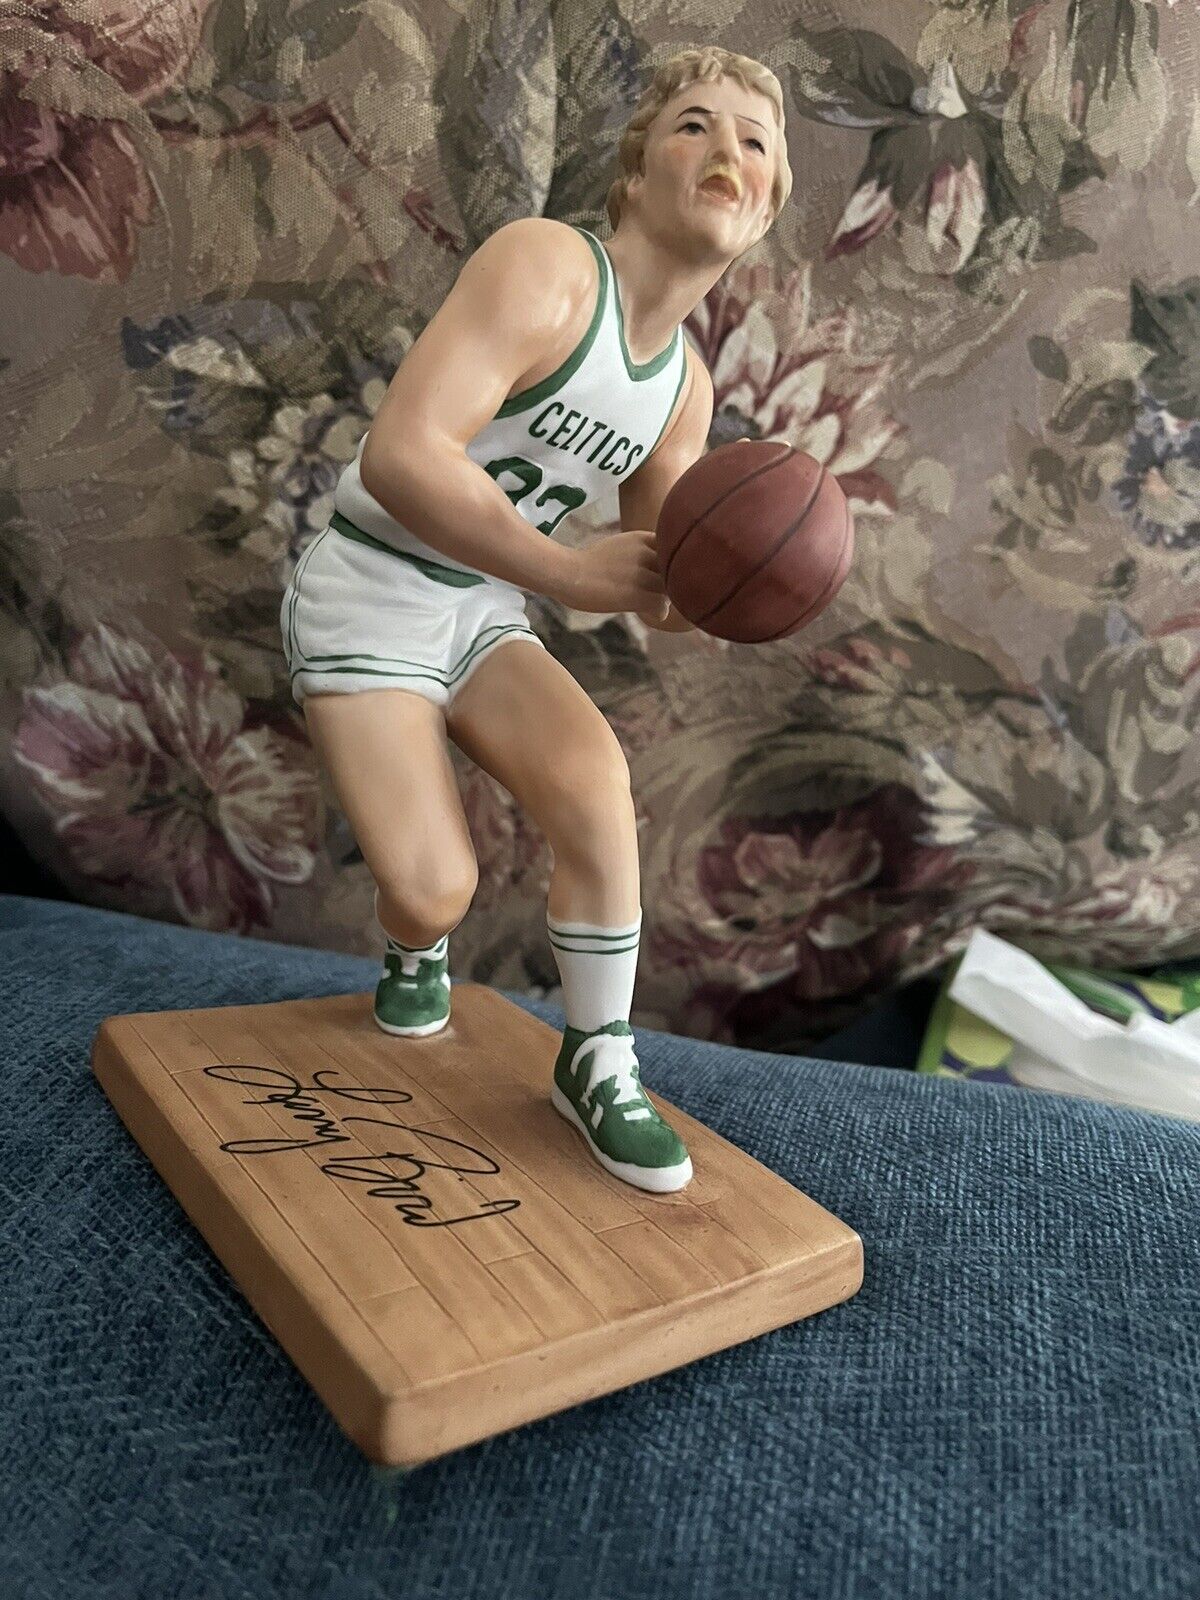 Larry Bird Ceramic From The Larry Bird Collection From Sports Impressions #2280.